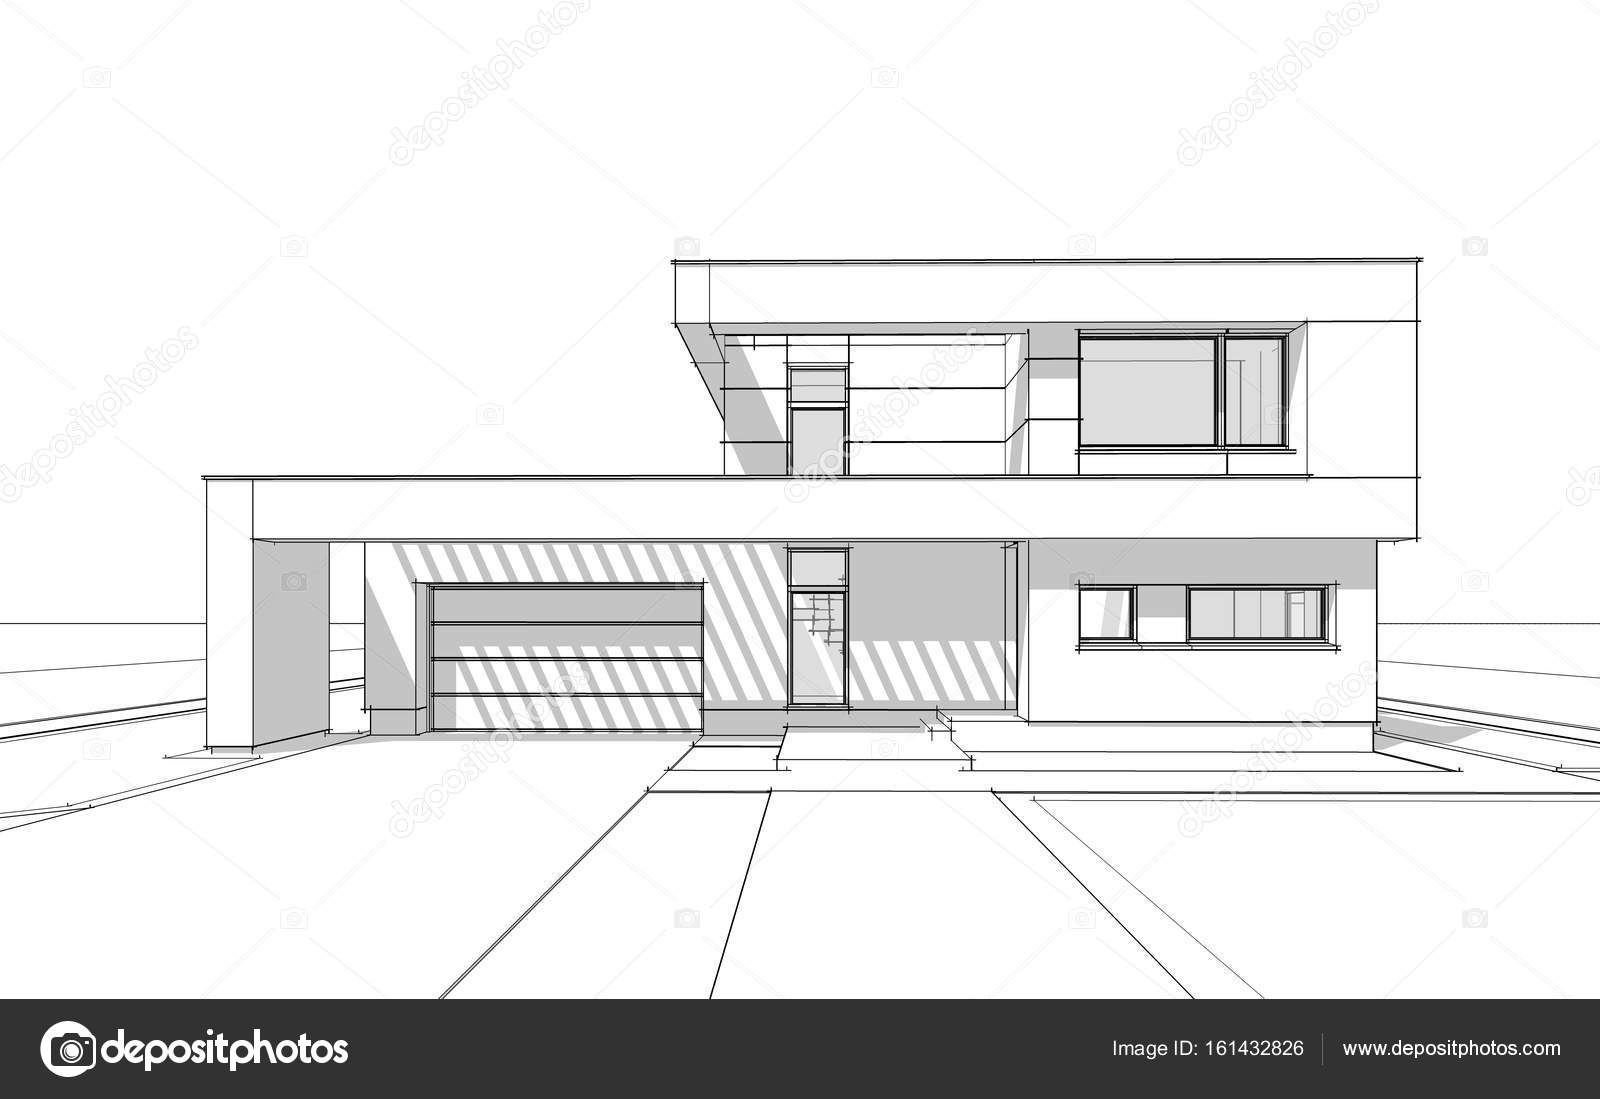 3d Rendering Sketch Of Modern Cozy House Stock Photo Image By C Korisbo Gmail Com 161432826 The best selection of royalty free modern house sketch vector art, graphics and stock illustrations. https depositphotos com 161432826 stock photo 3d rendering sketch of modern html